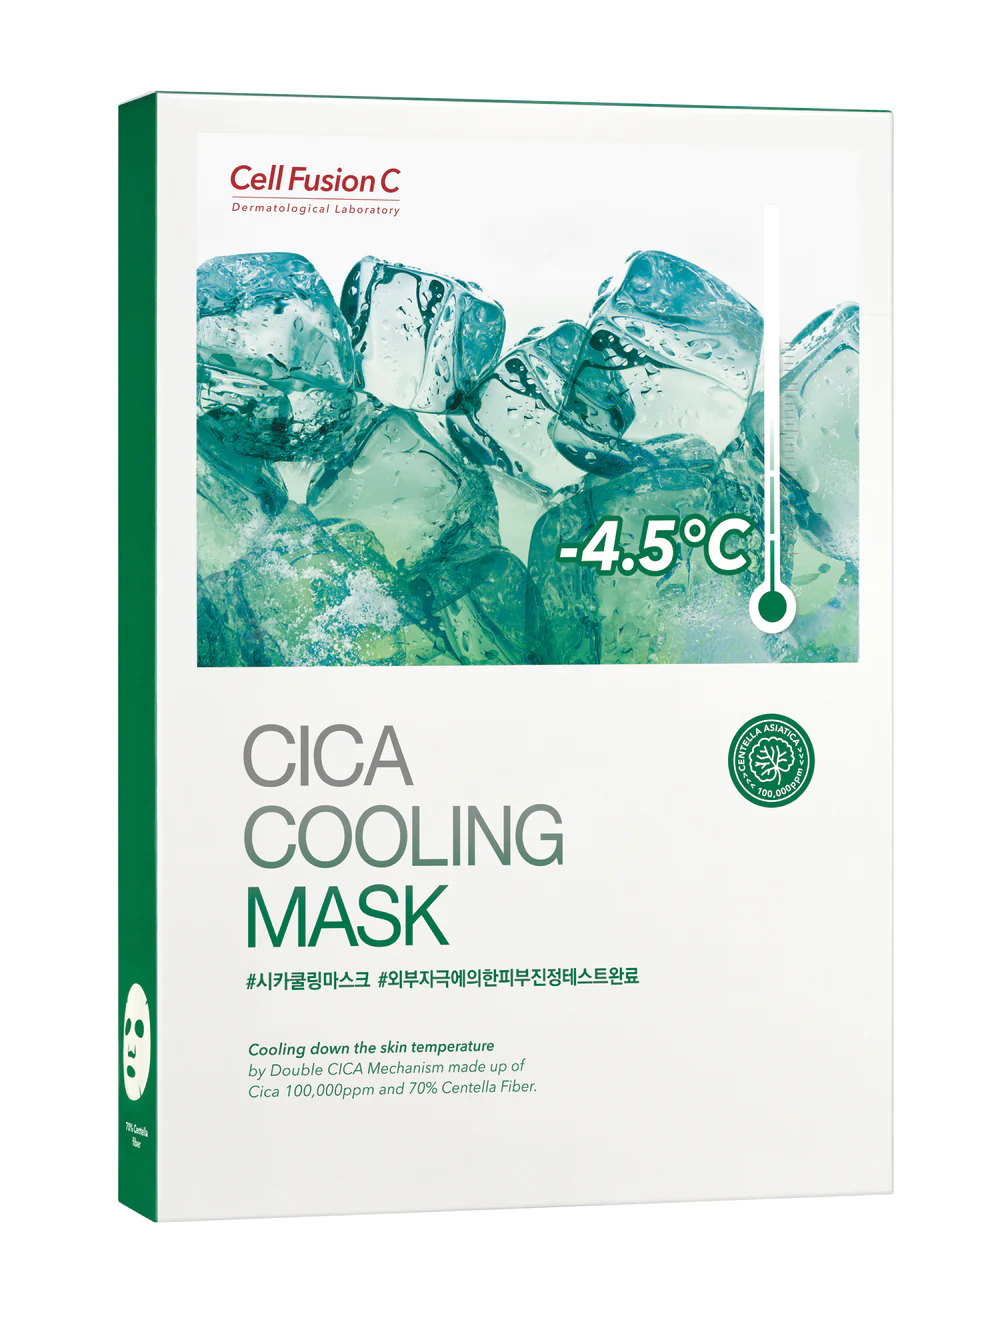 [CellFusionC] Cica Cooling Mask - 5 sheets - Enrapturecosmetics